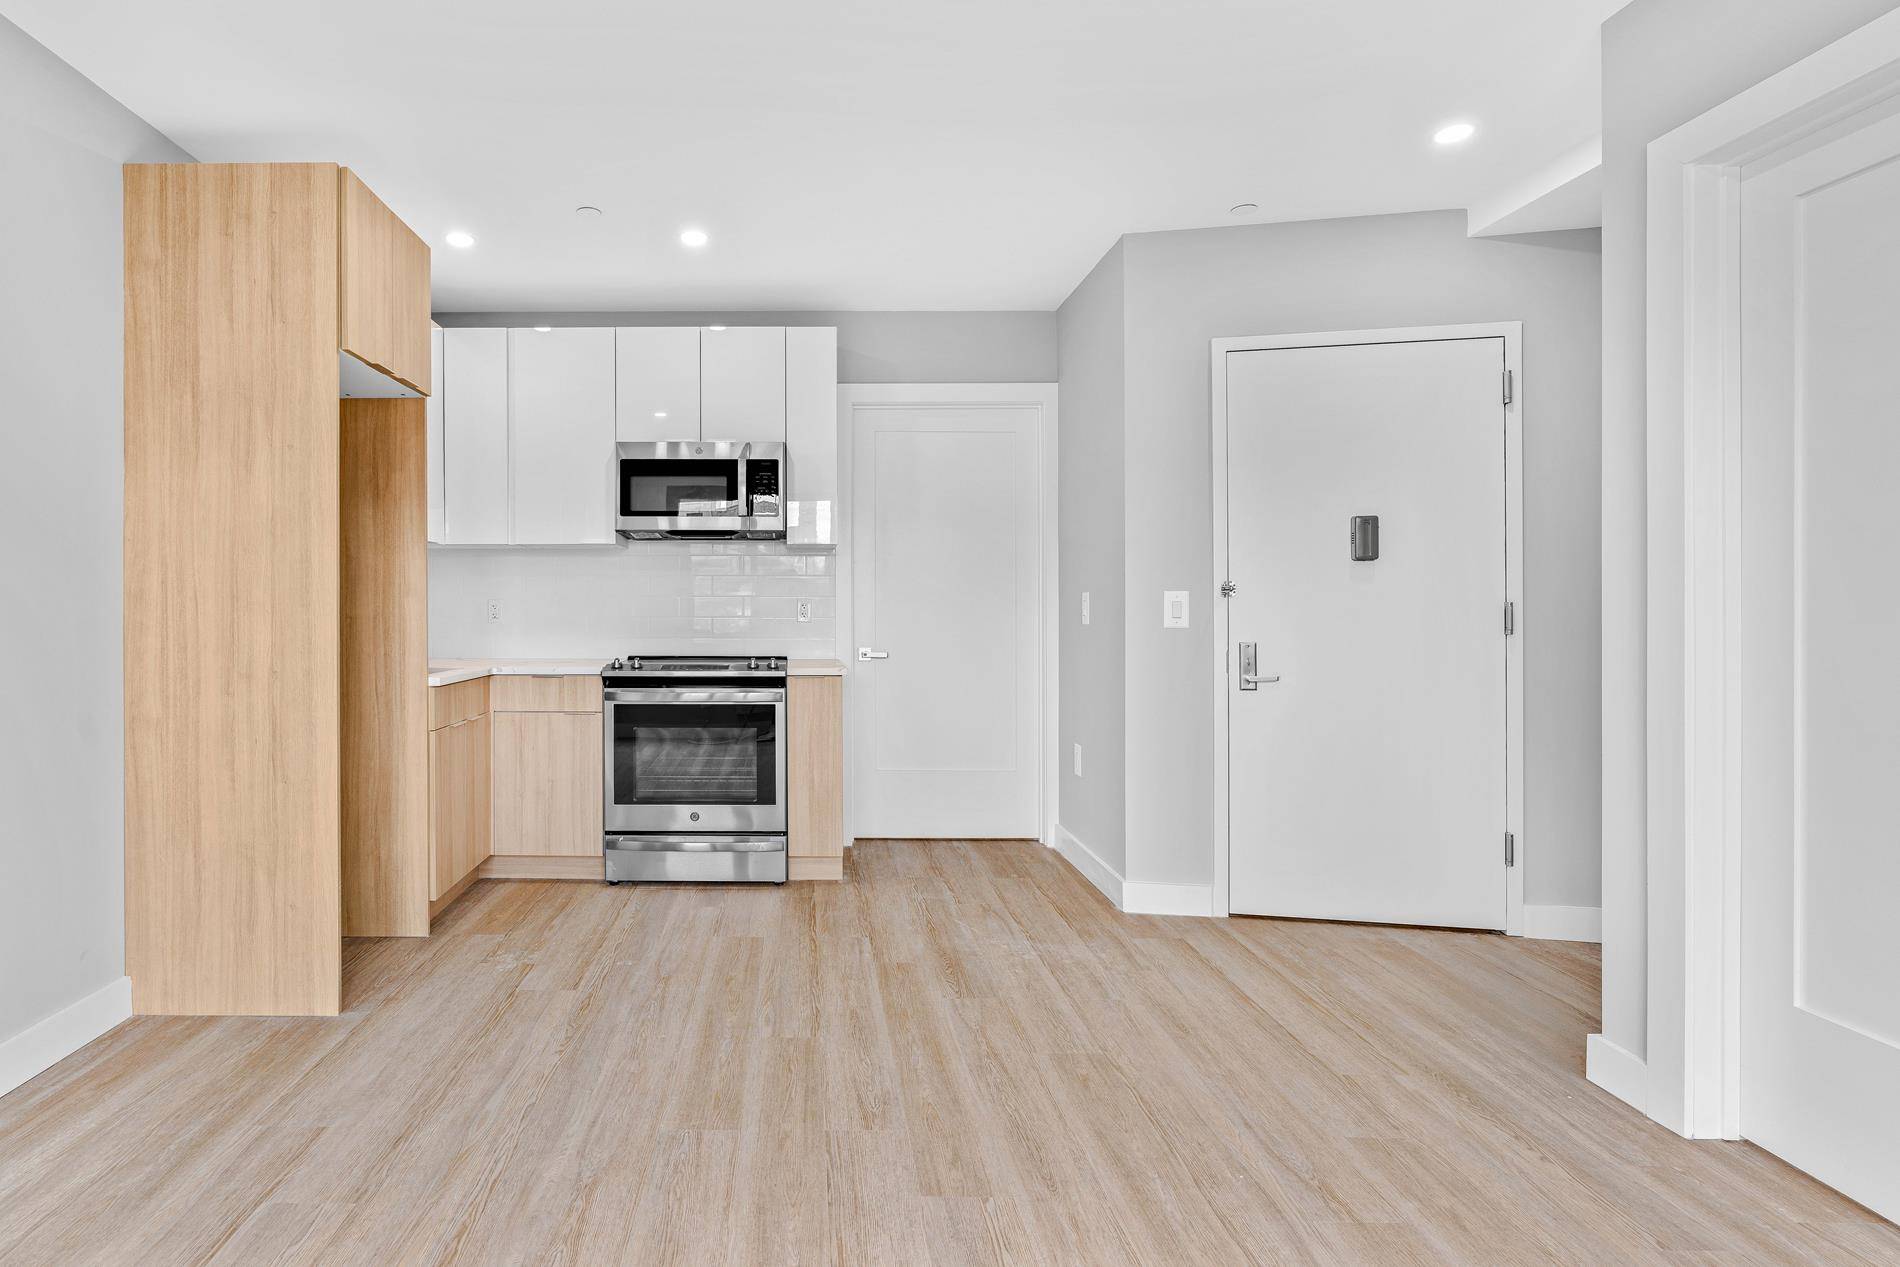 Introducing 30 38 31 street Brand new elevator building in the heart of Astoria !